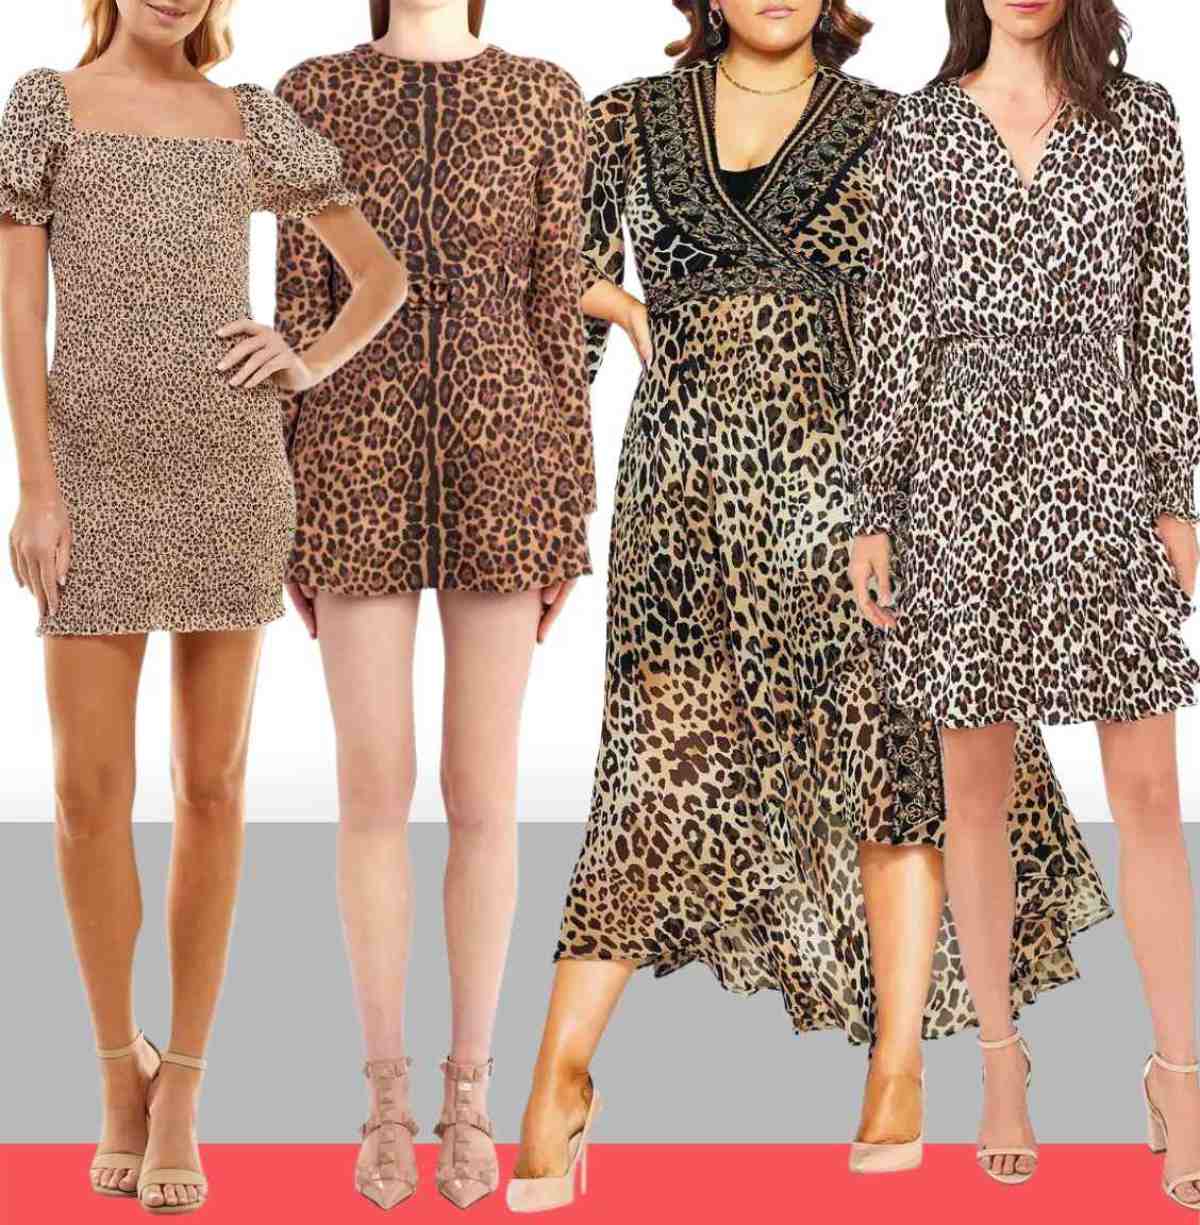 3 women wearing different beige color shoes with leopard print dress outfits.